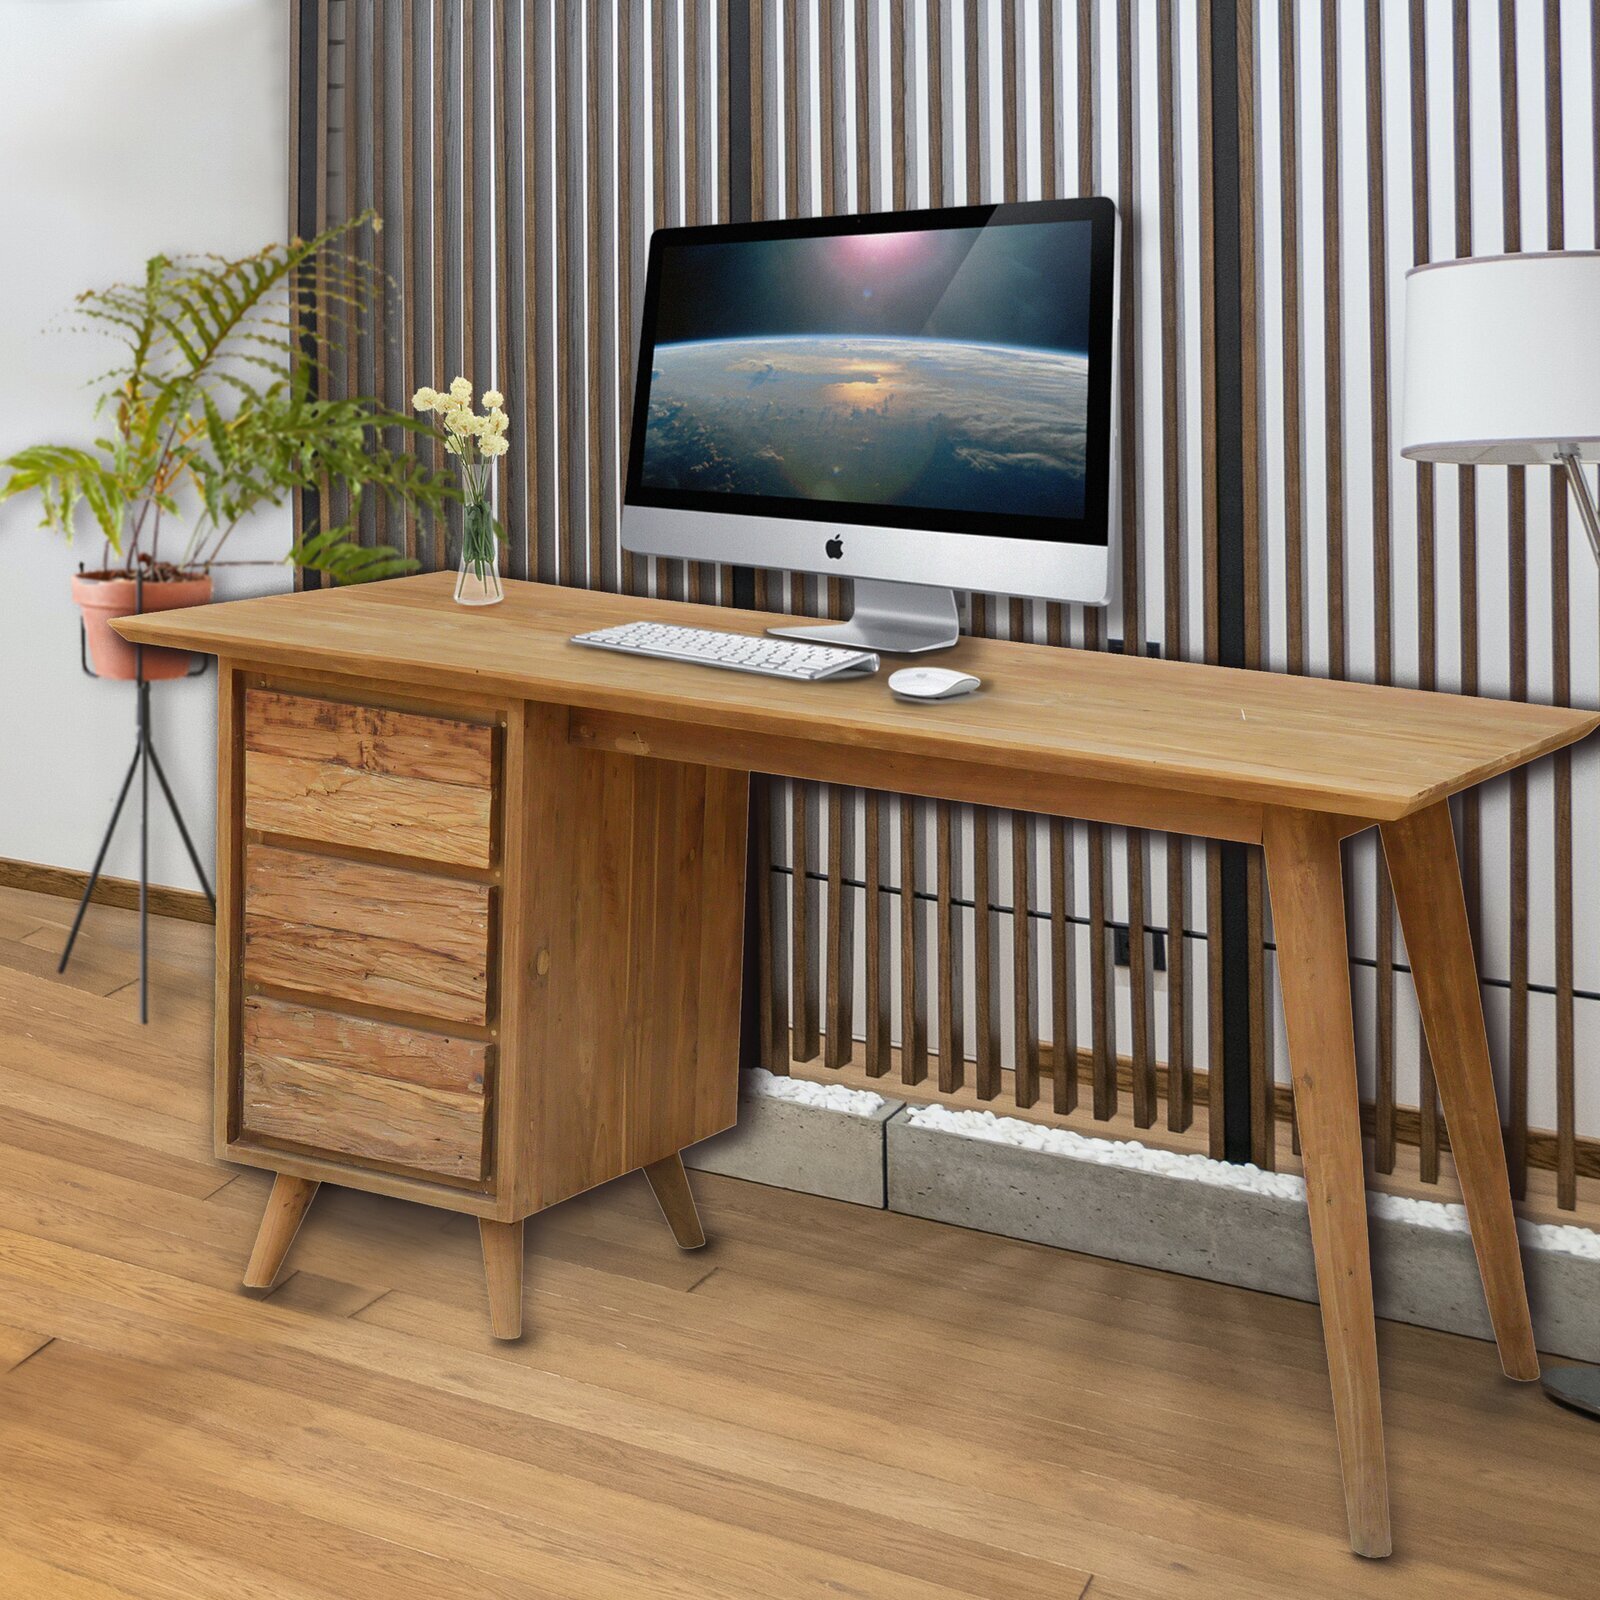 Solid Wood Writing Desk